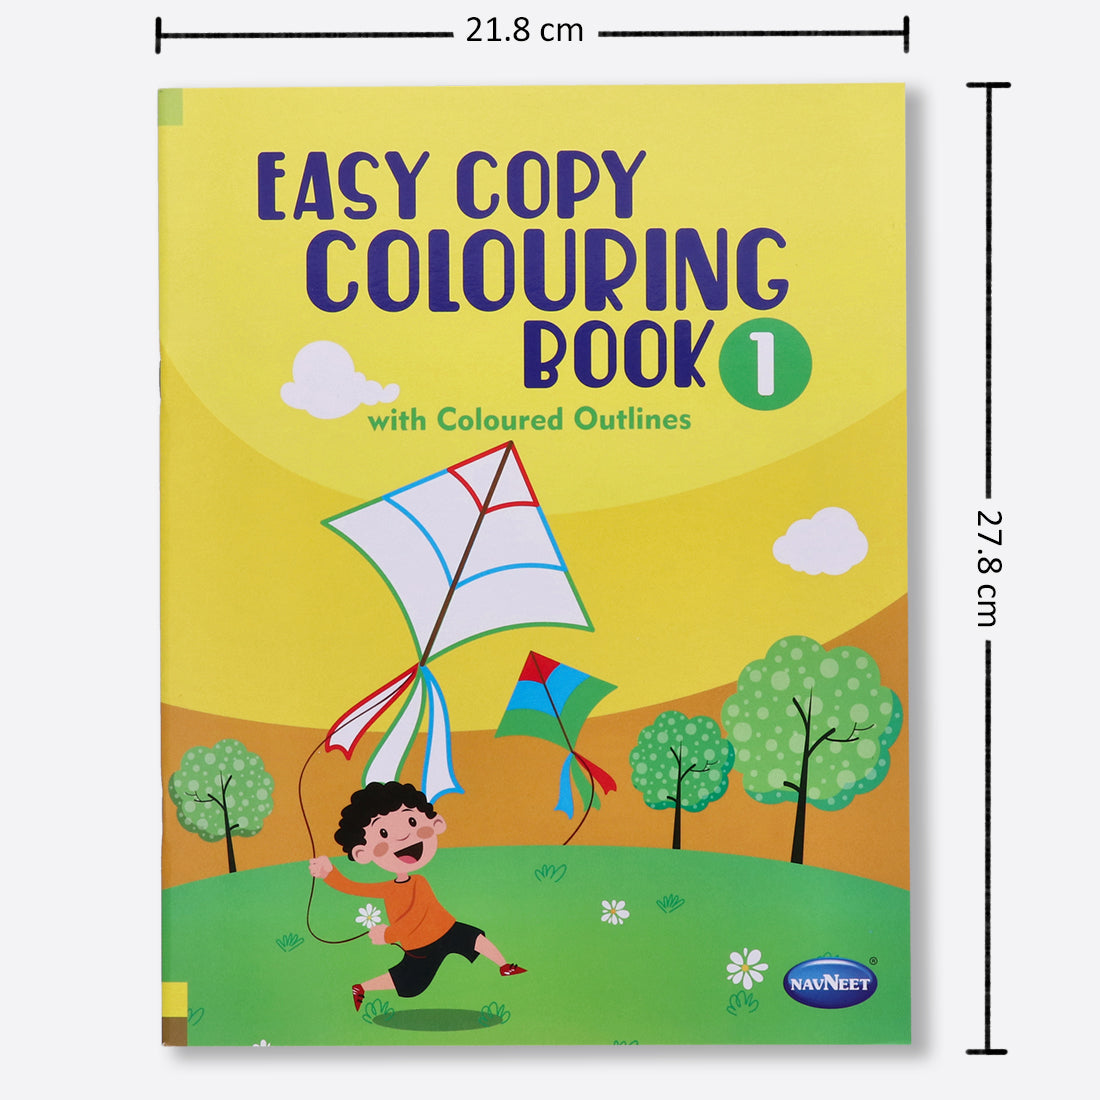 Navneet Easy Copy Colouring Book Set of 4 - Colouring books for kids - 120 pages with Coloured Outline having big pictures - Toys & Treat, Our Friendly Helpers- Youva Crayons